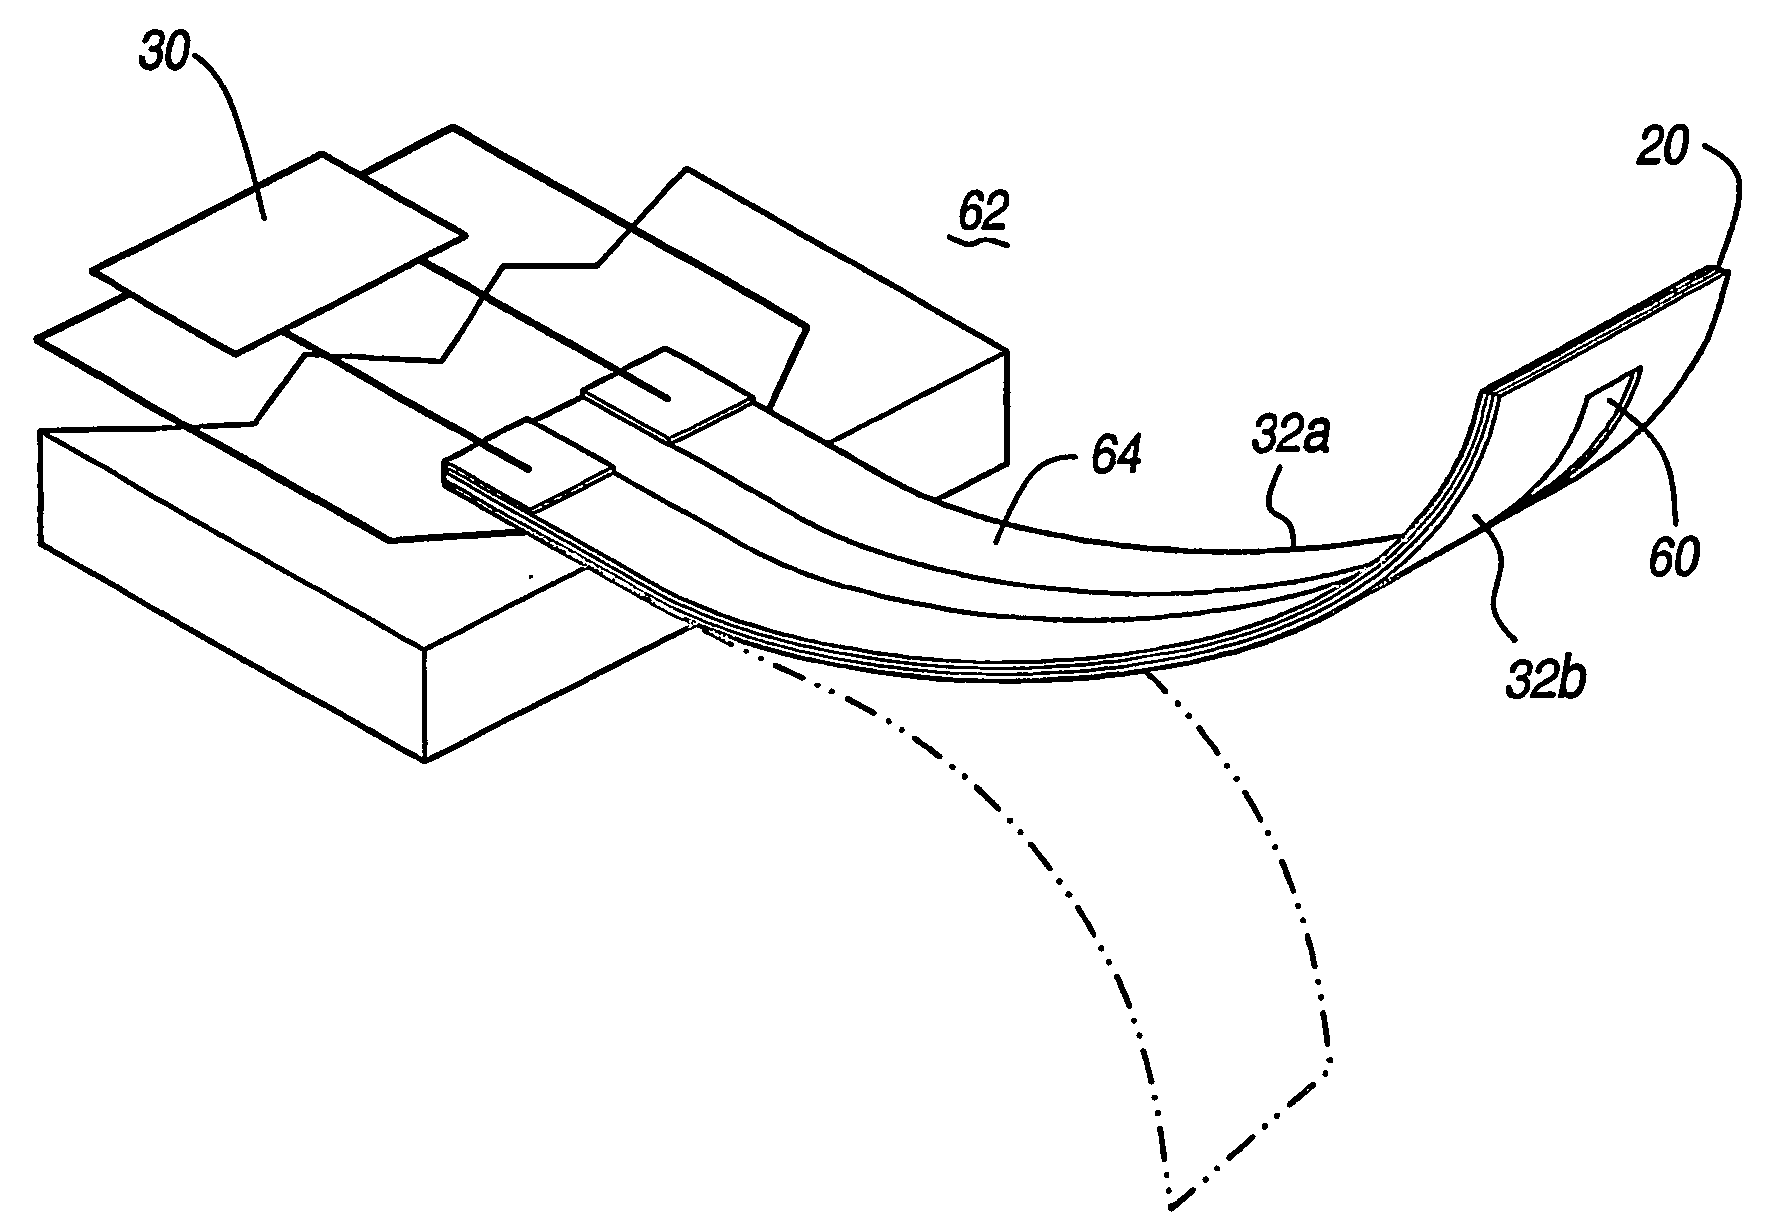 Prestrained thin-film shape memory actuator using polymeric substrates